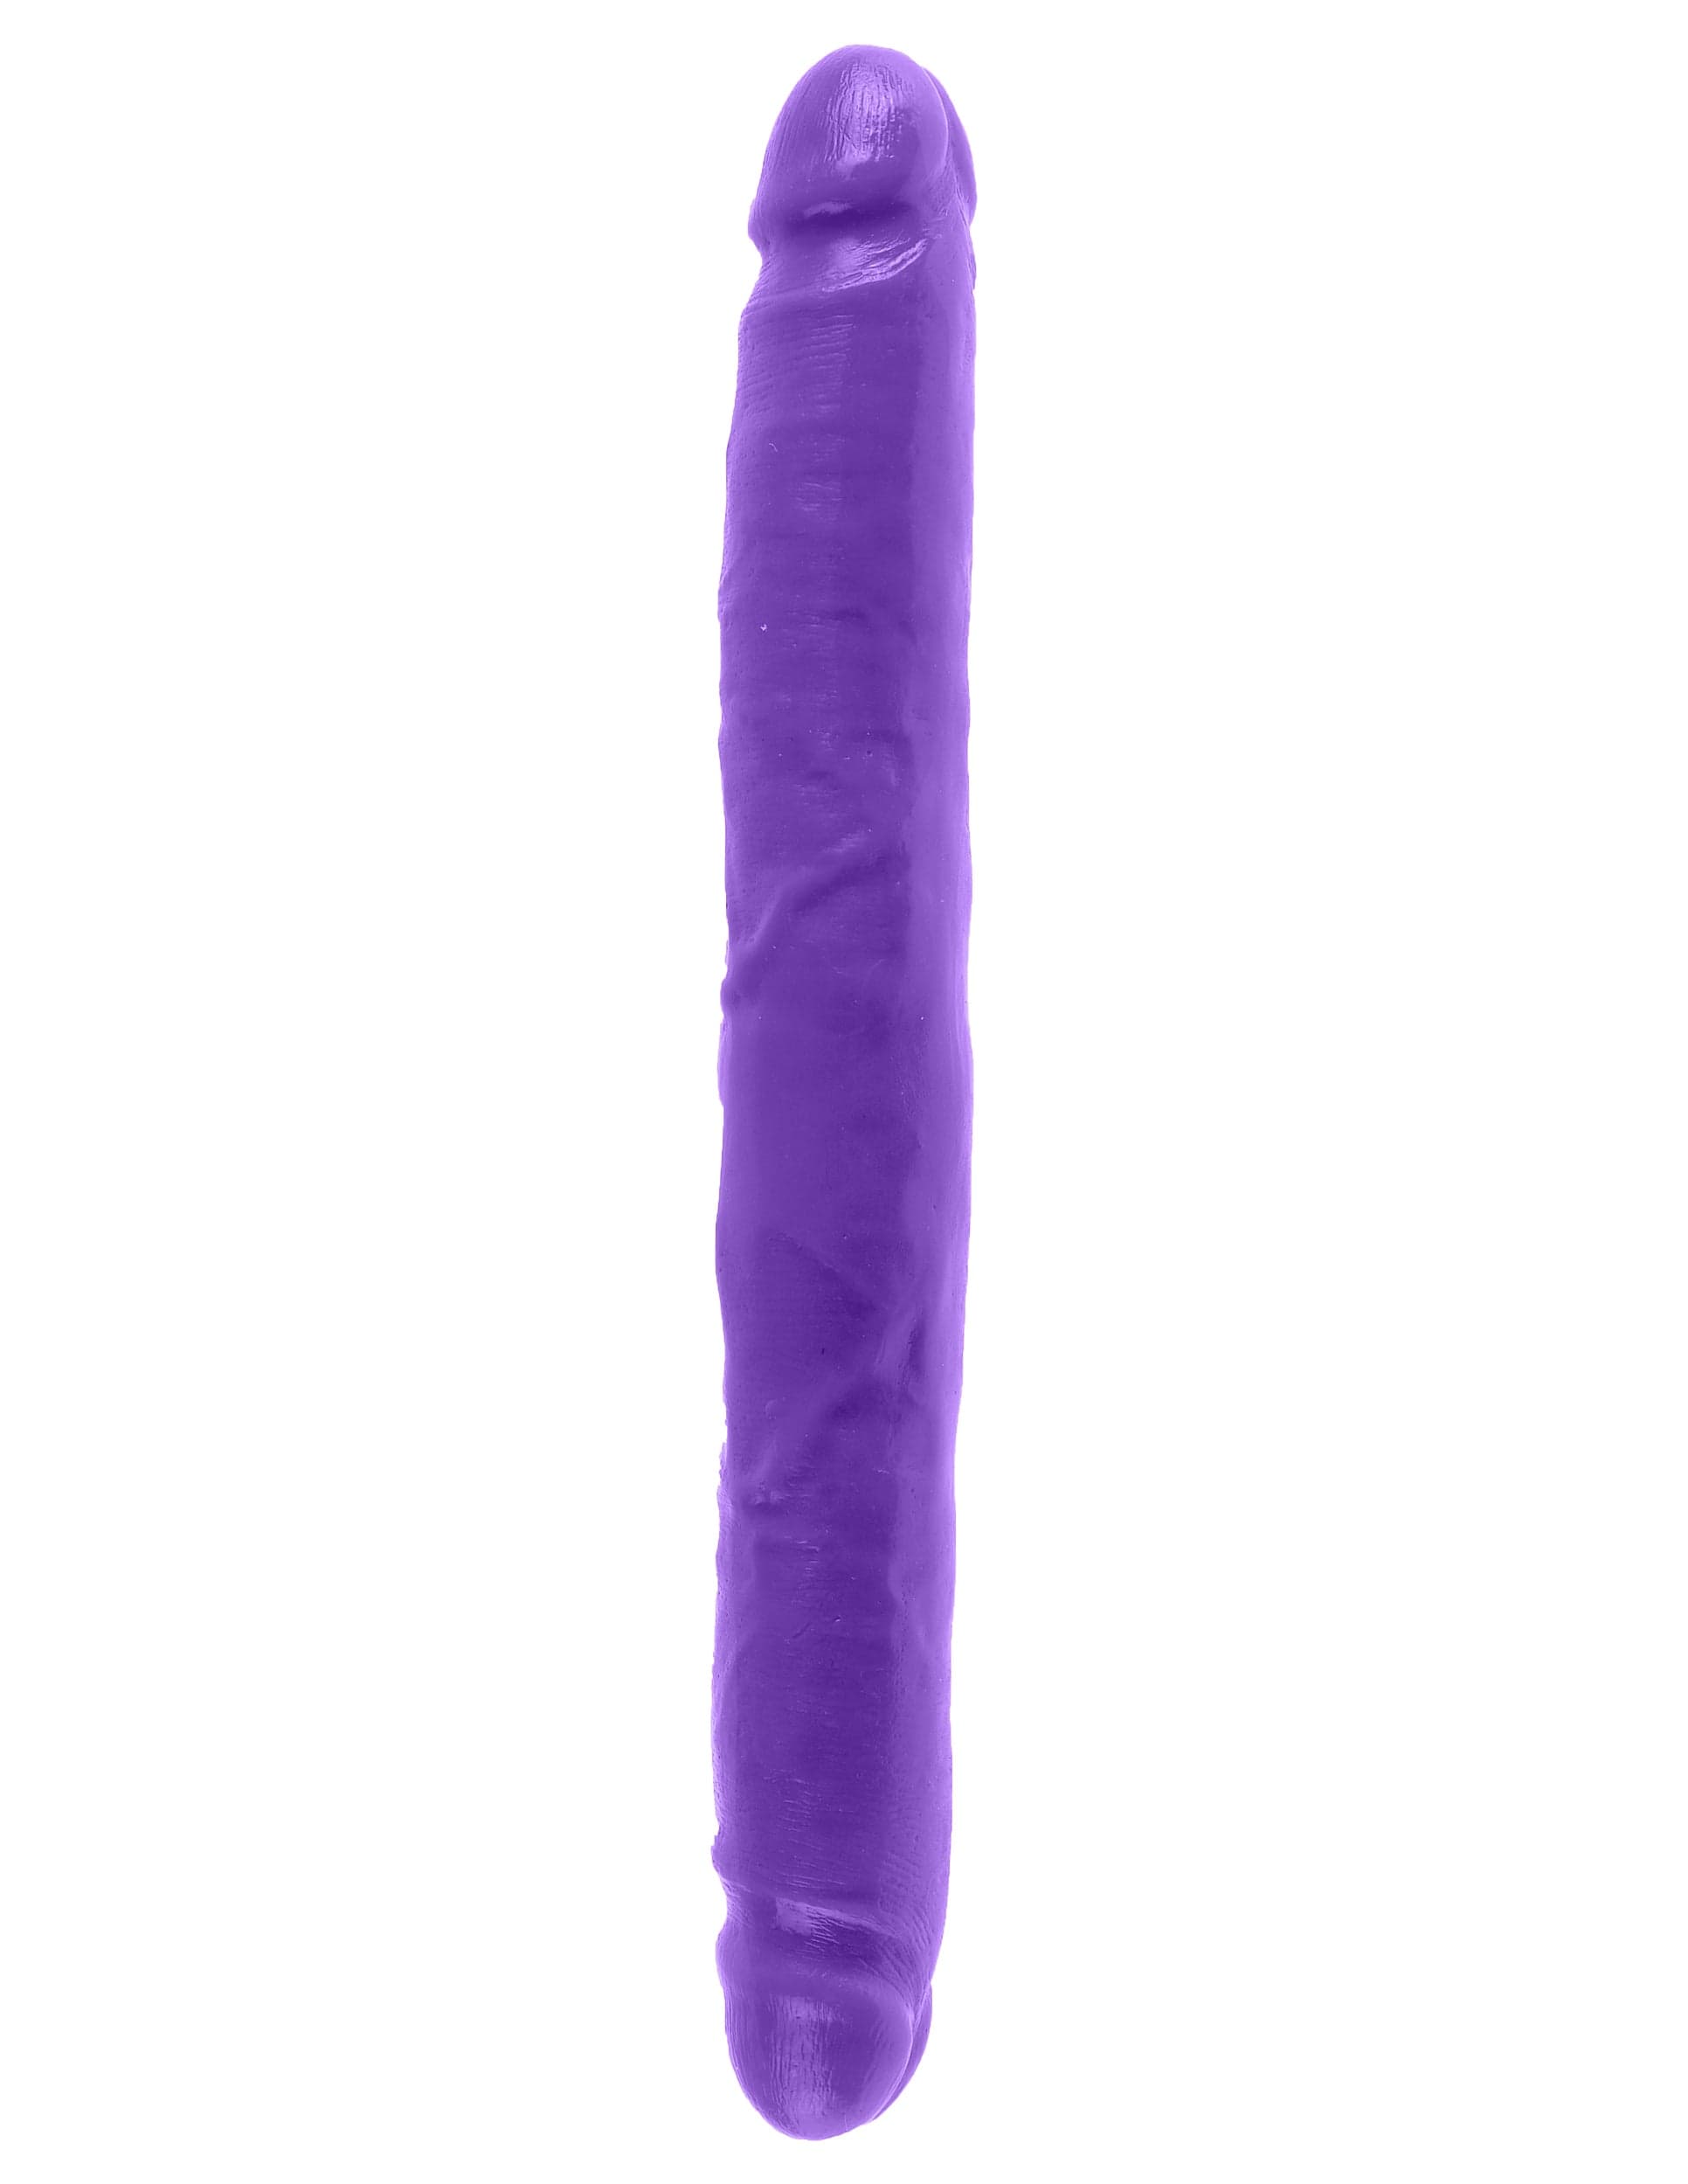 DOUBLE DONG 12" - PURPLE